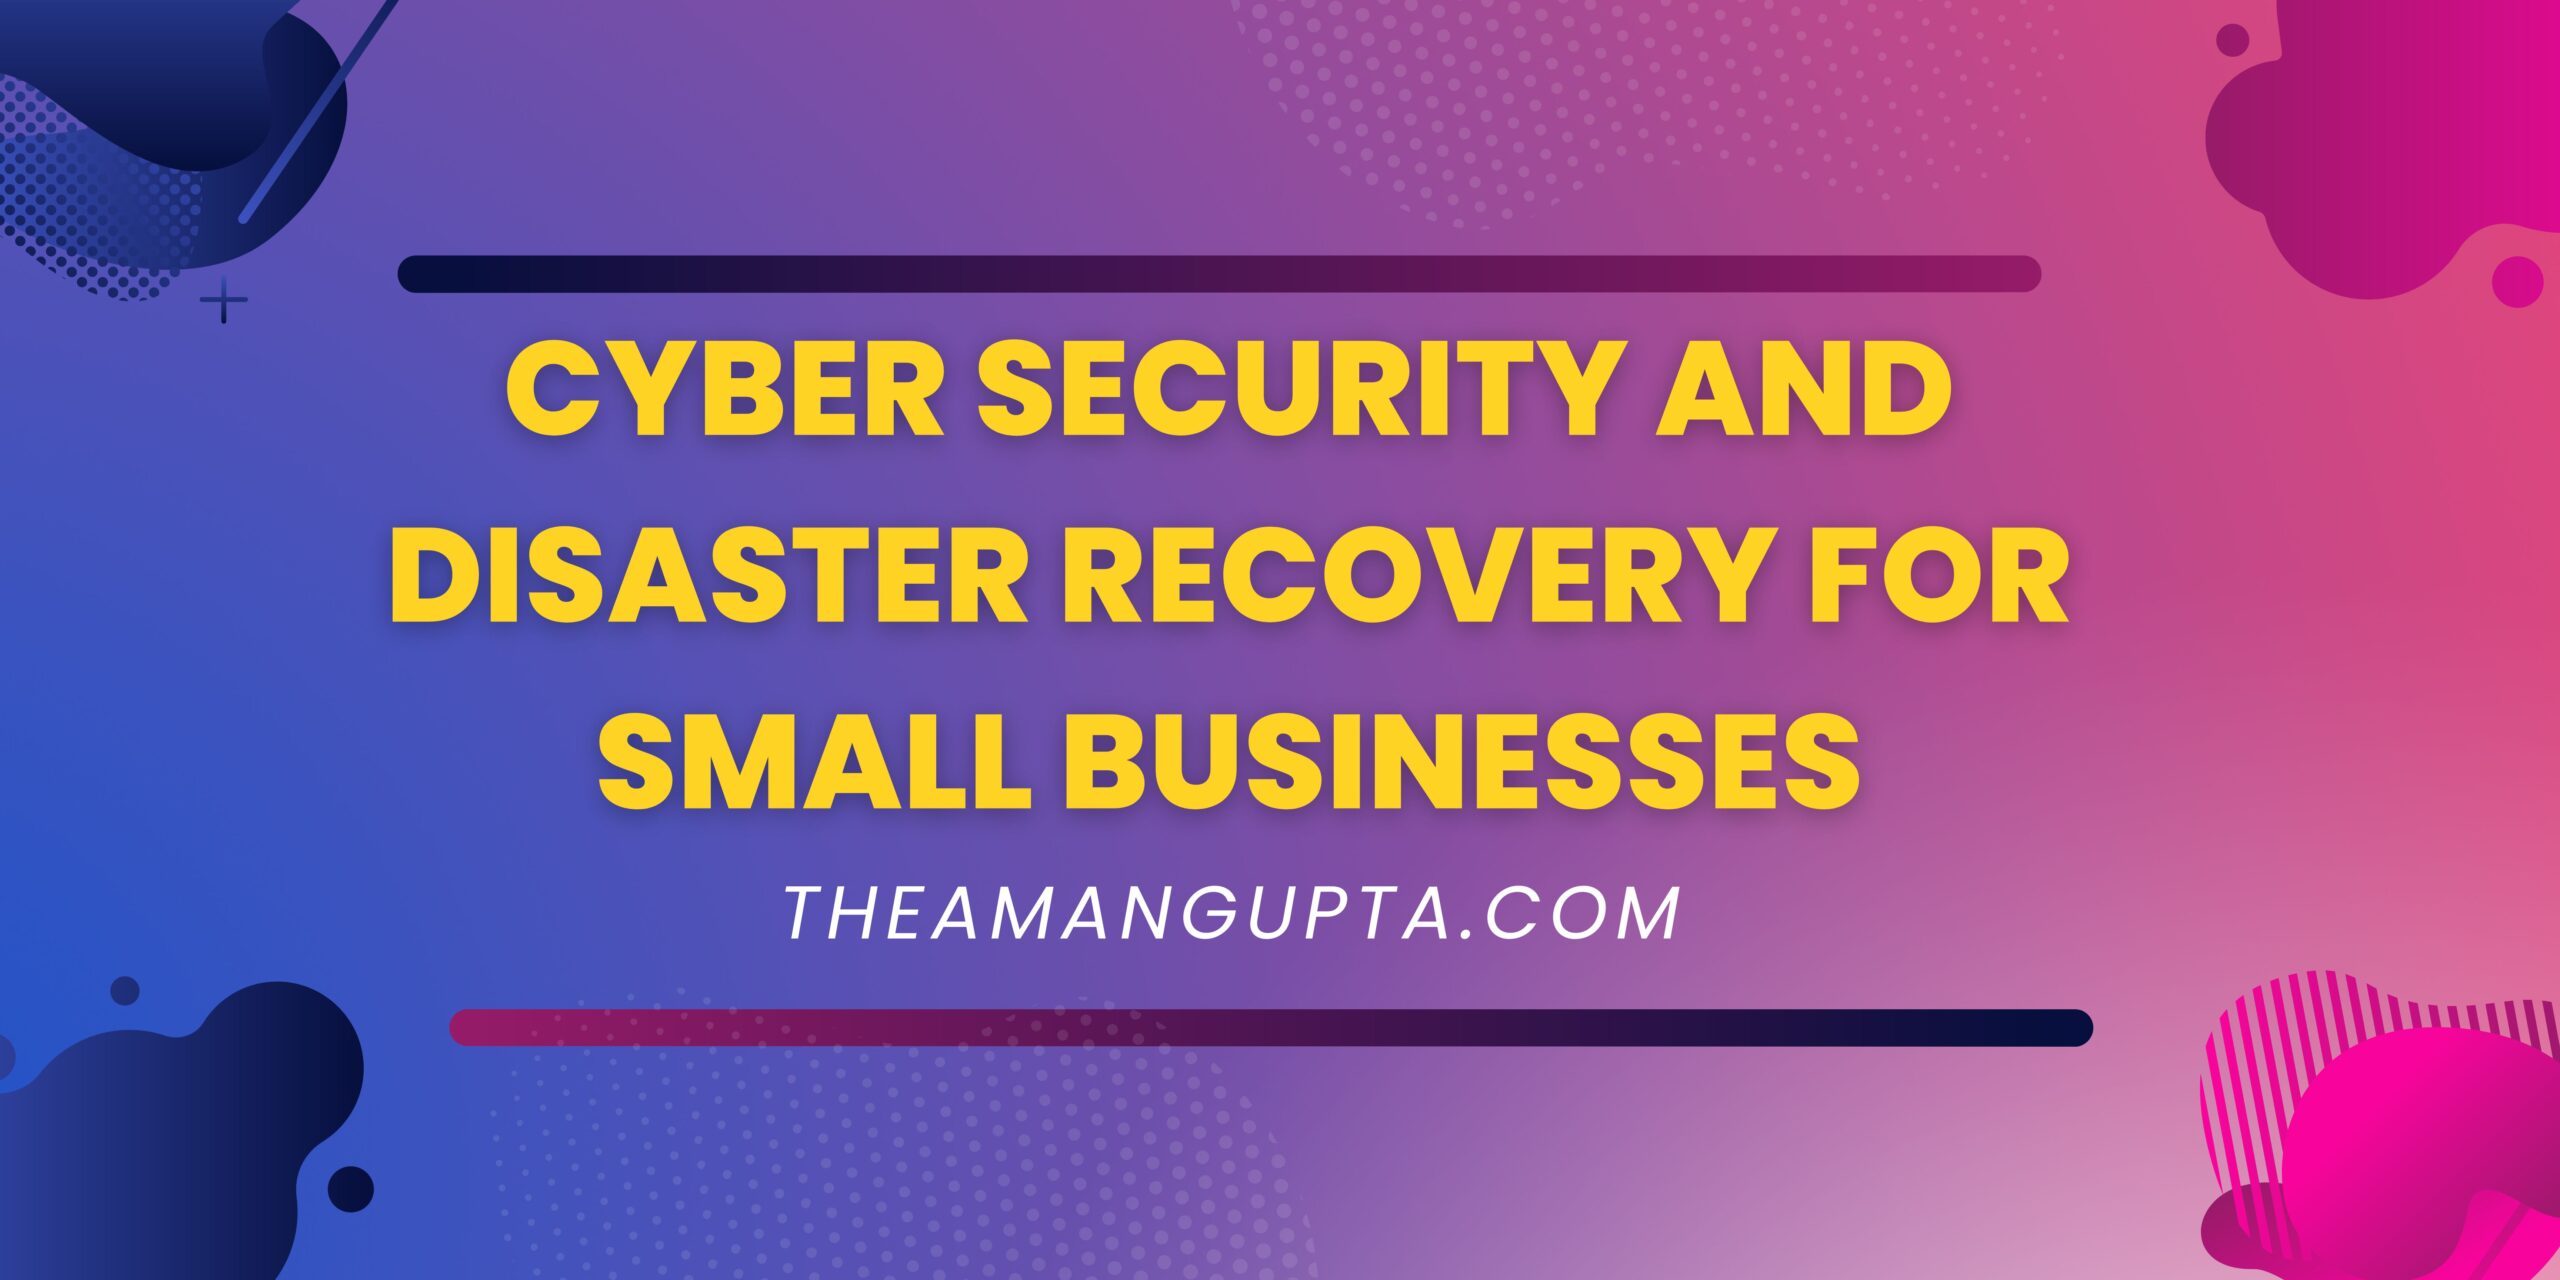 Cyber Security And Disaster Recovery For Small Businesses|Small Buisness|Theamangupta|Theamangupta